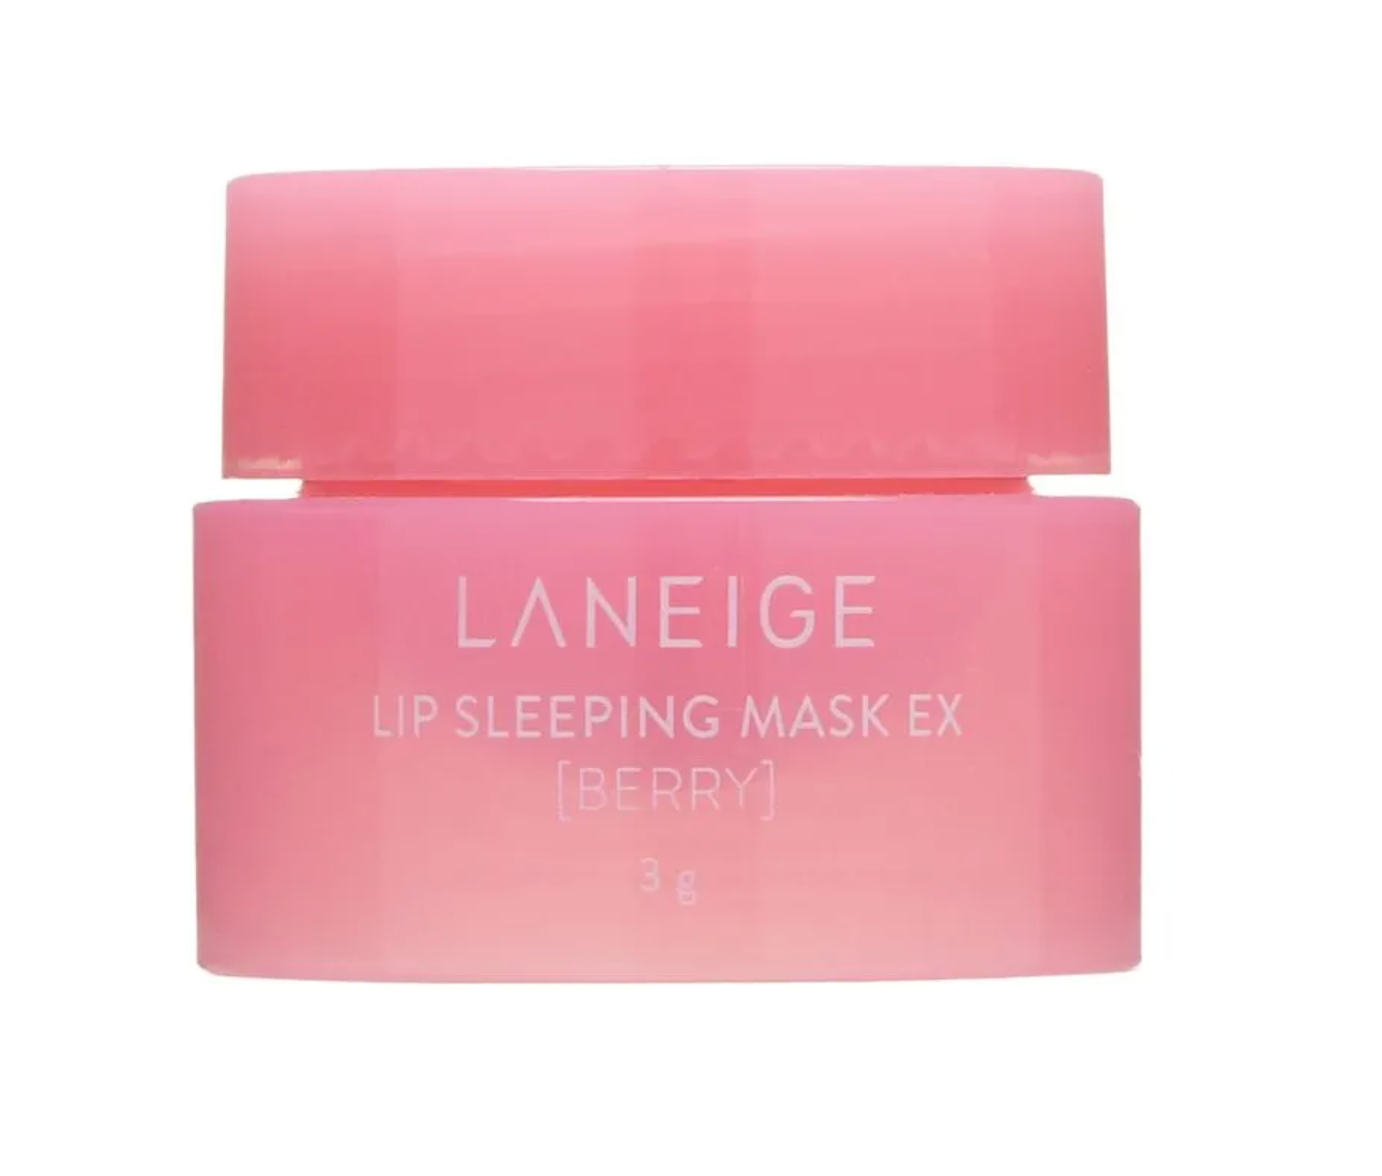  Laneige Lip Sleeping Mask EX (Berry) for overnight lip hydration. Pink container